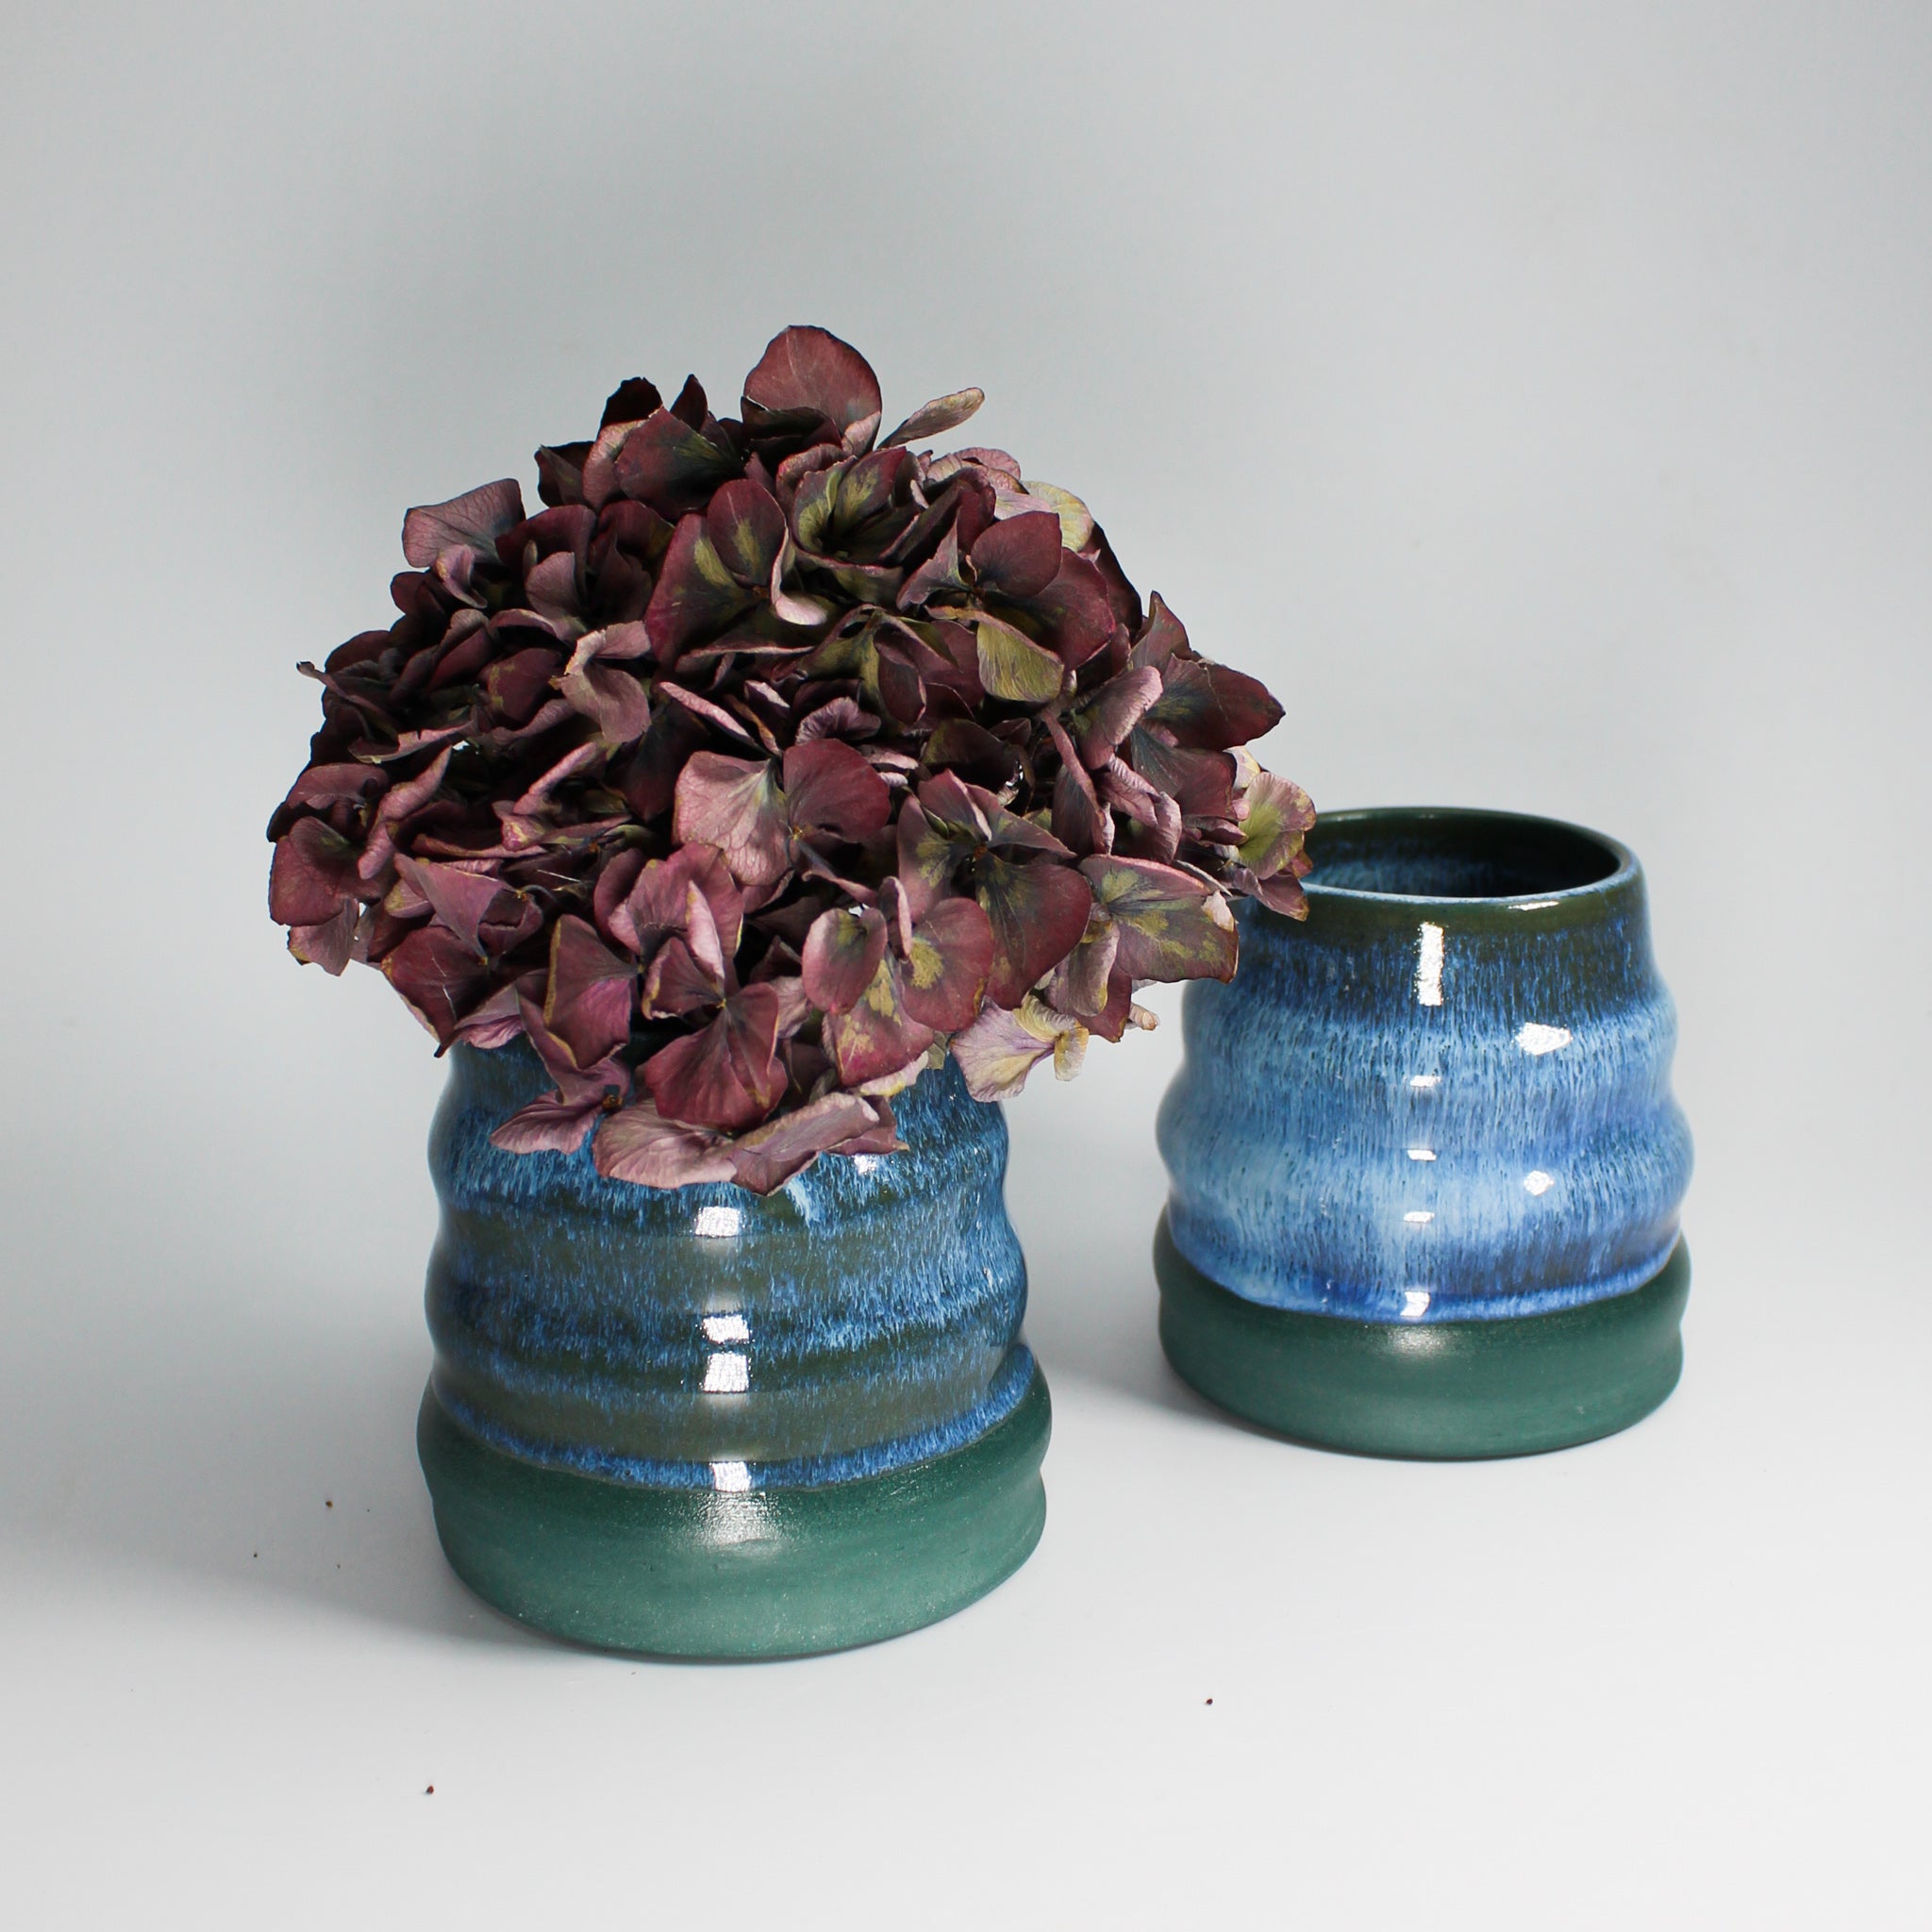 Pair of blue and green pottery mini wobble vases. One has dried flowers in.